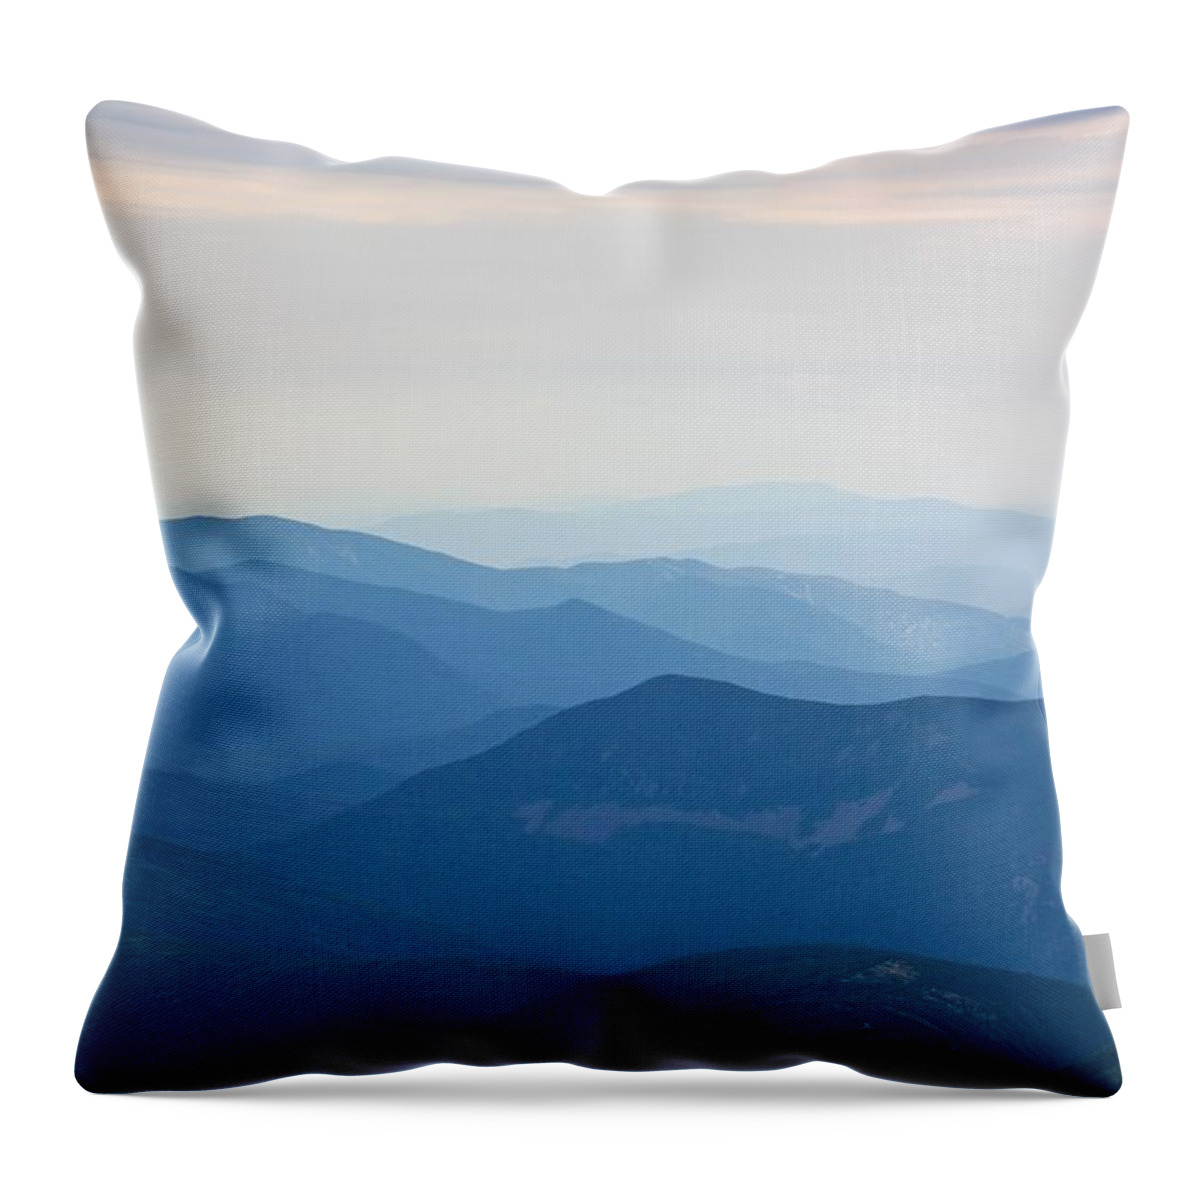 Mt. Washington Throw Pillow featuring the photograph Mt. Washington #13 by Deena Withycombe